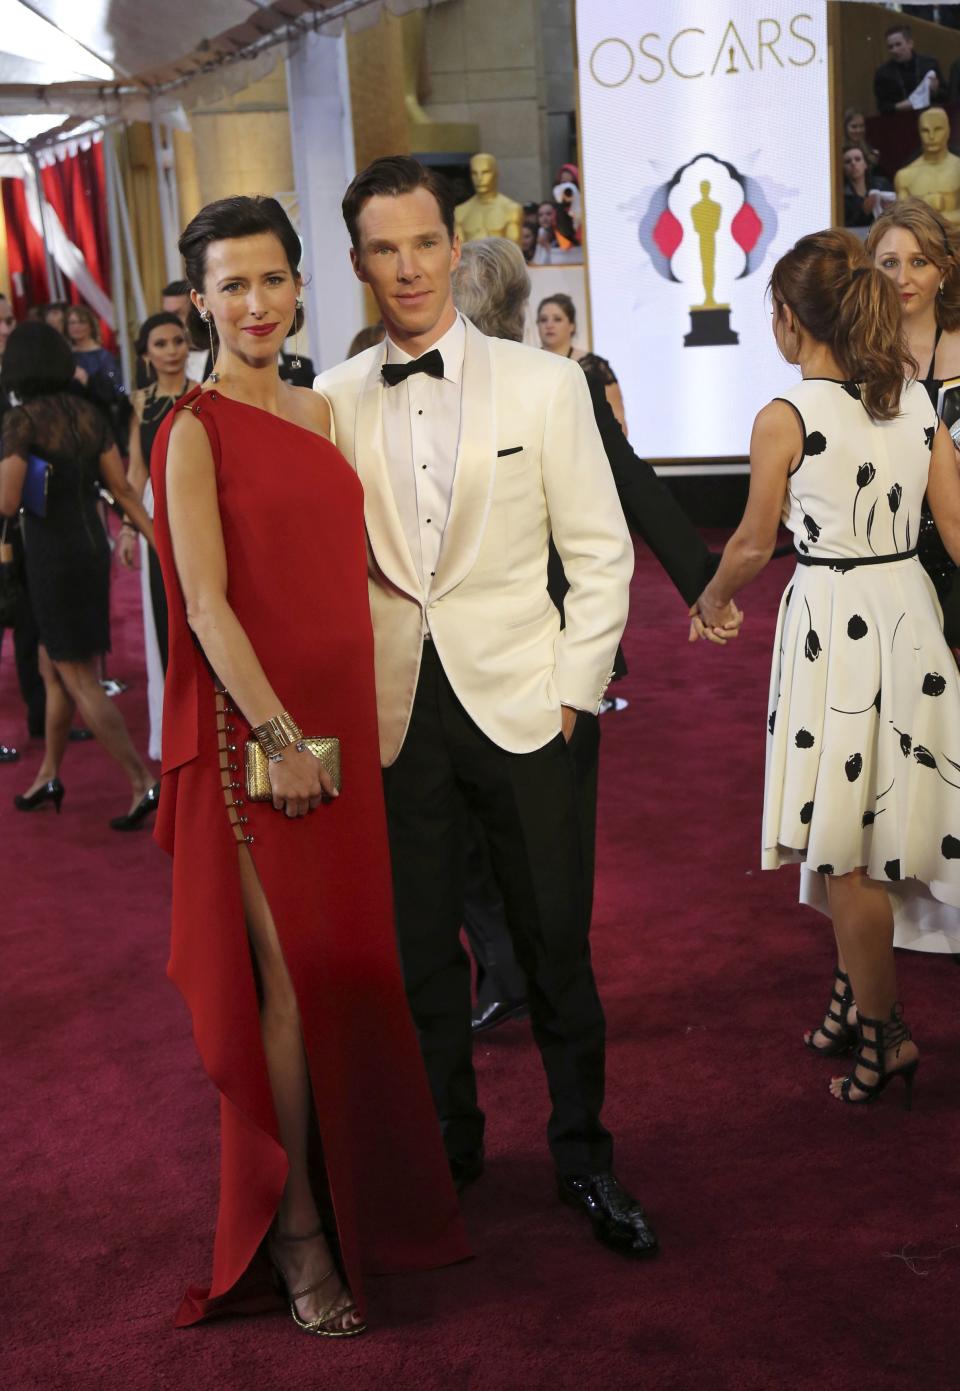 Benedict Cumberbatch and his wife Sophie Hunter arrive at the 87th Academy Awards in Hollywood